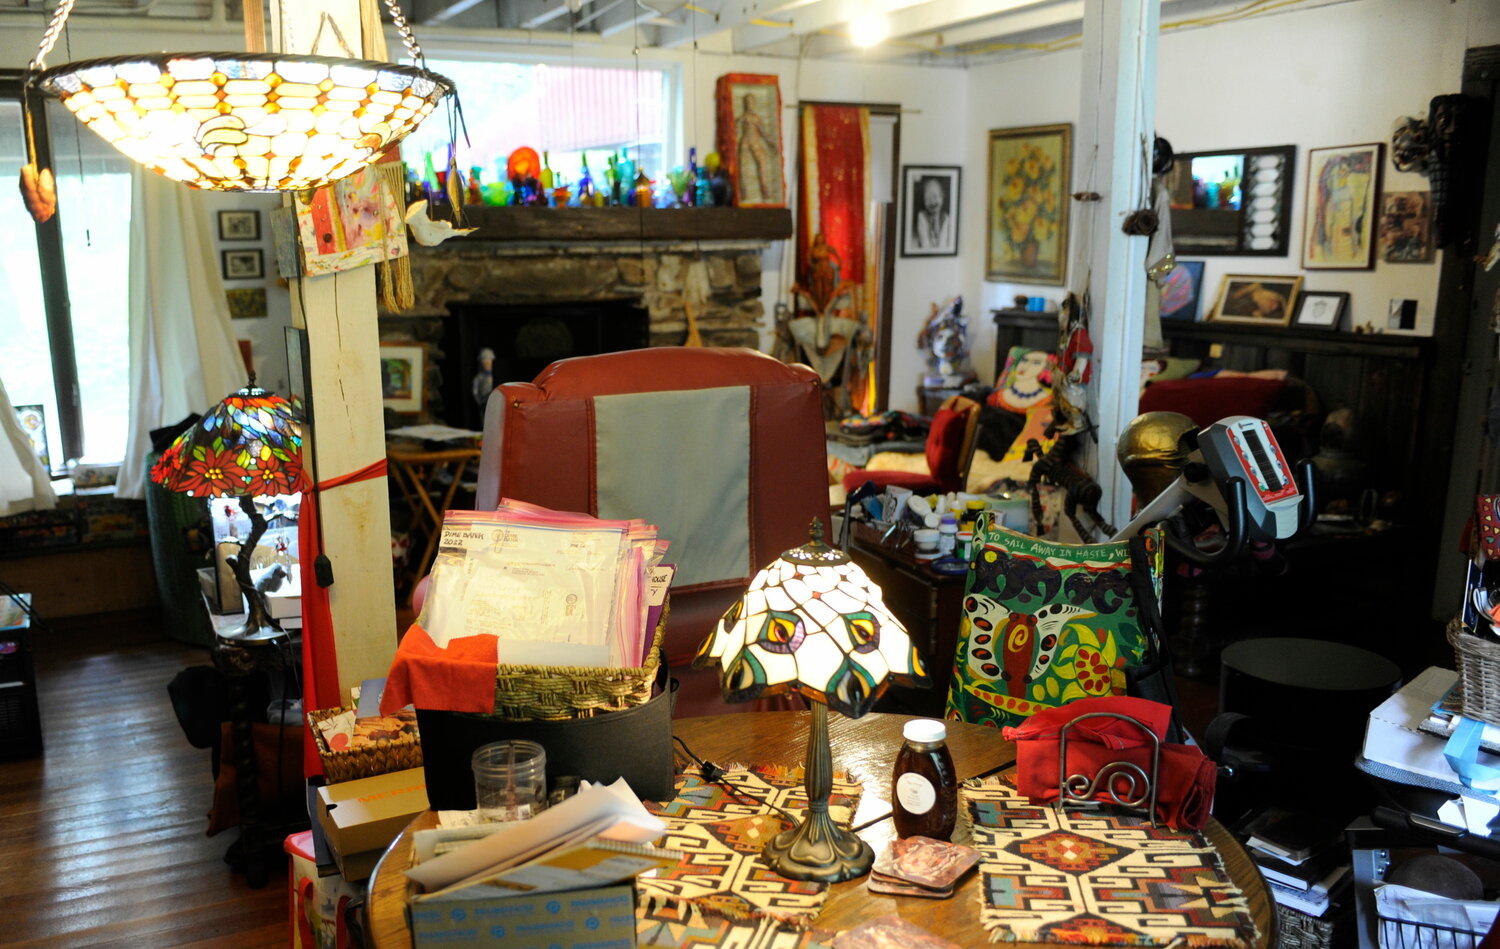 The old general store has become a home for Nancy Wells' art.